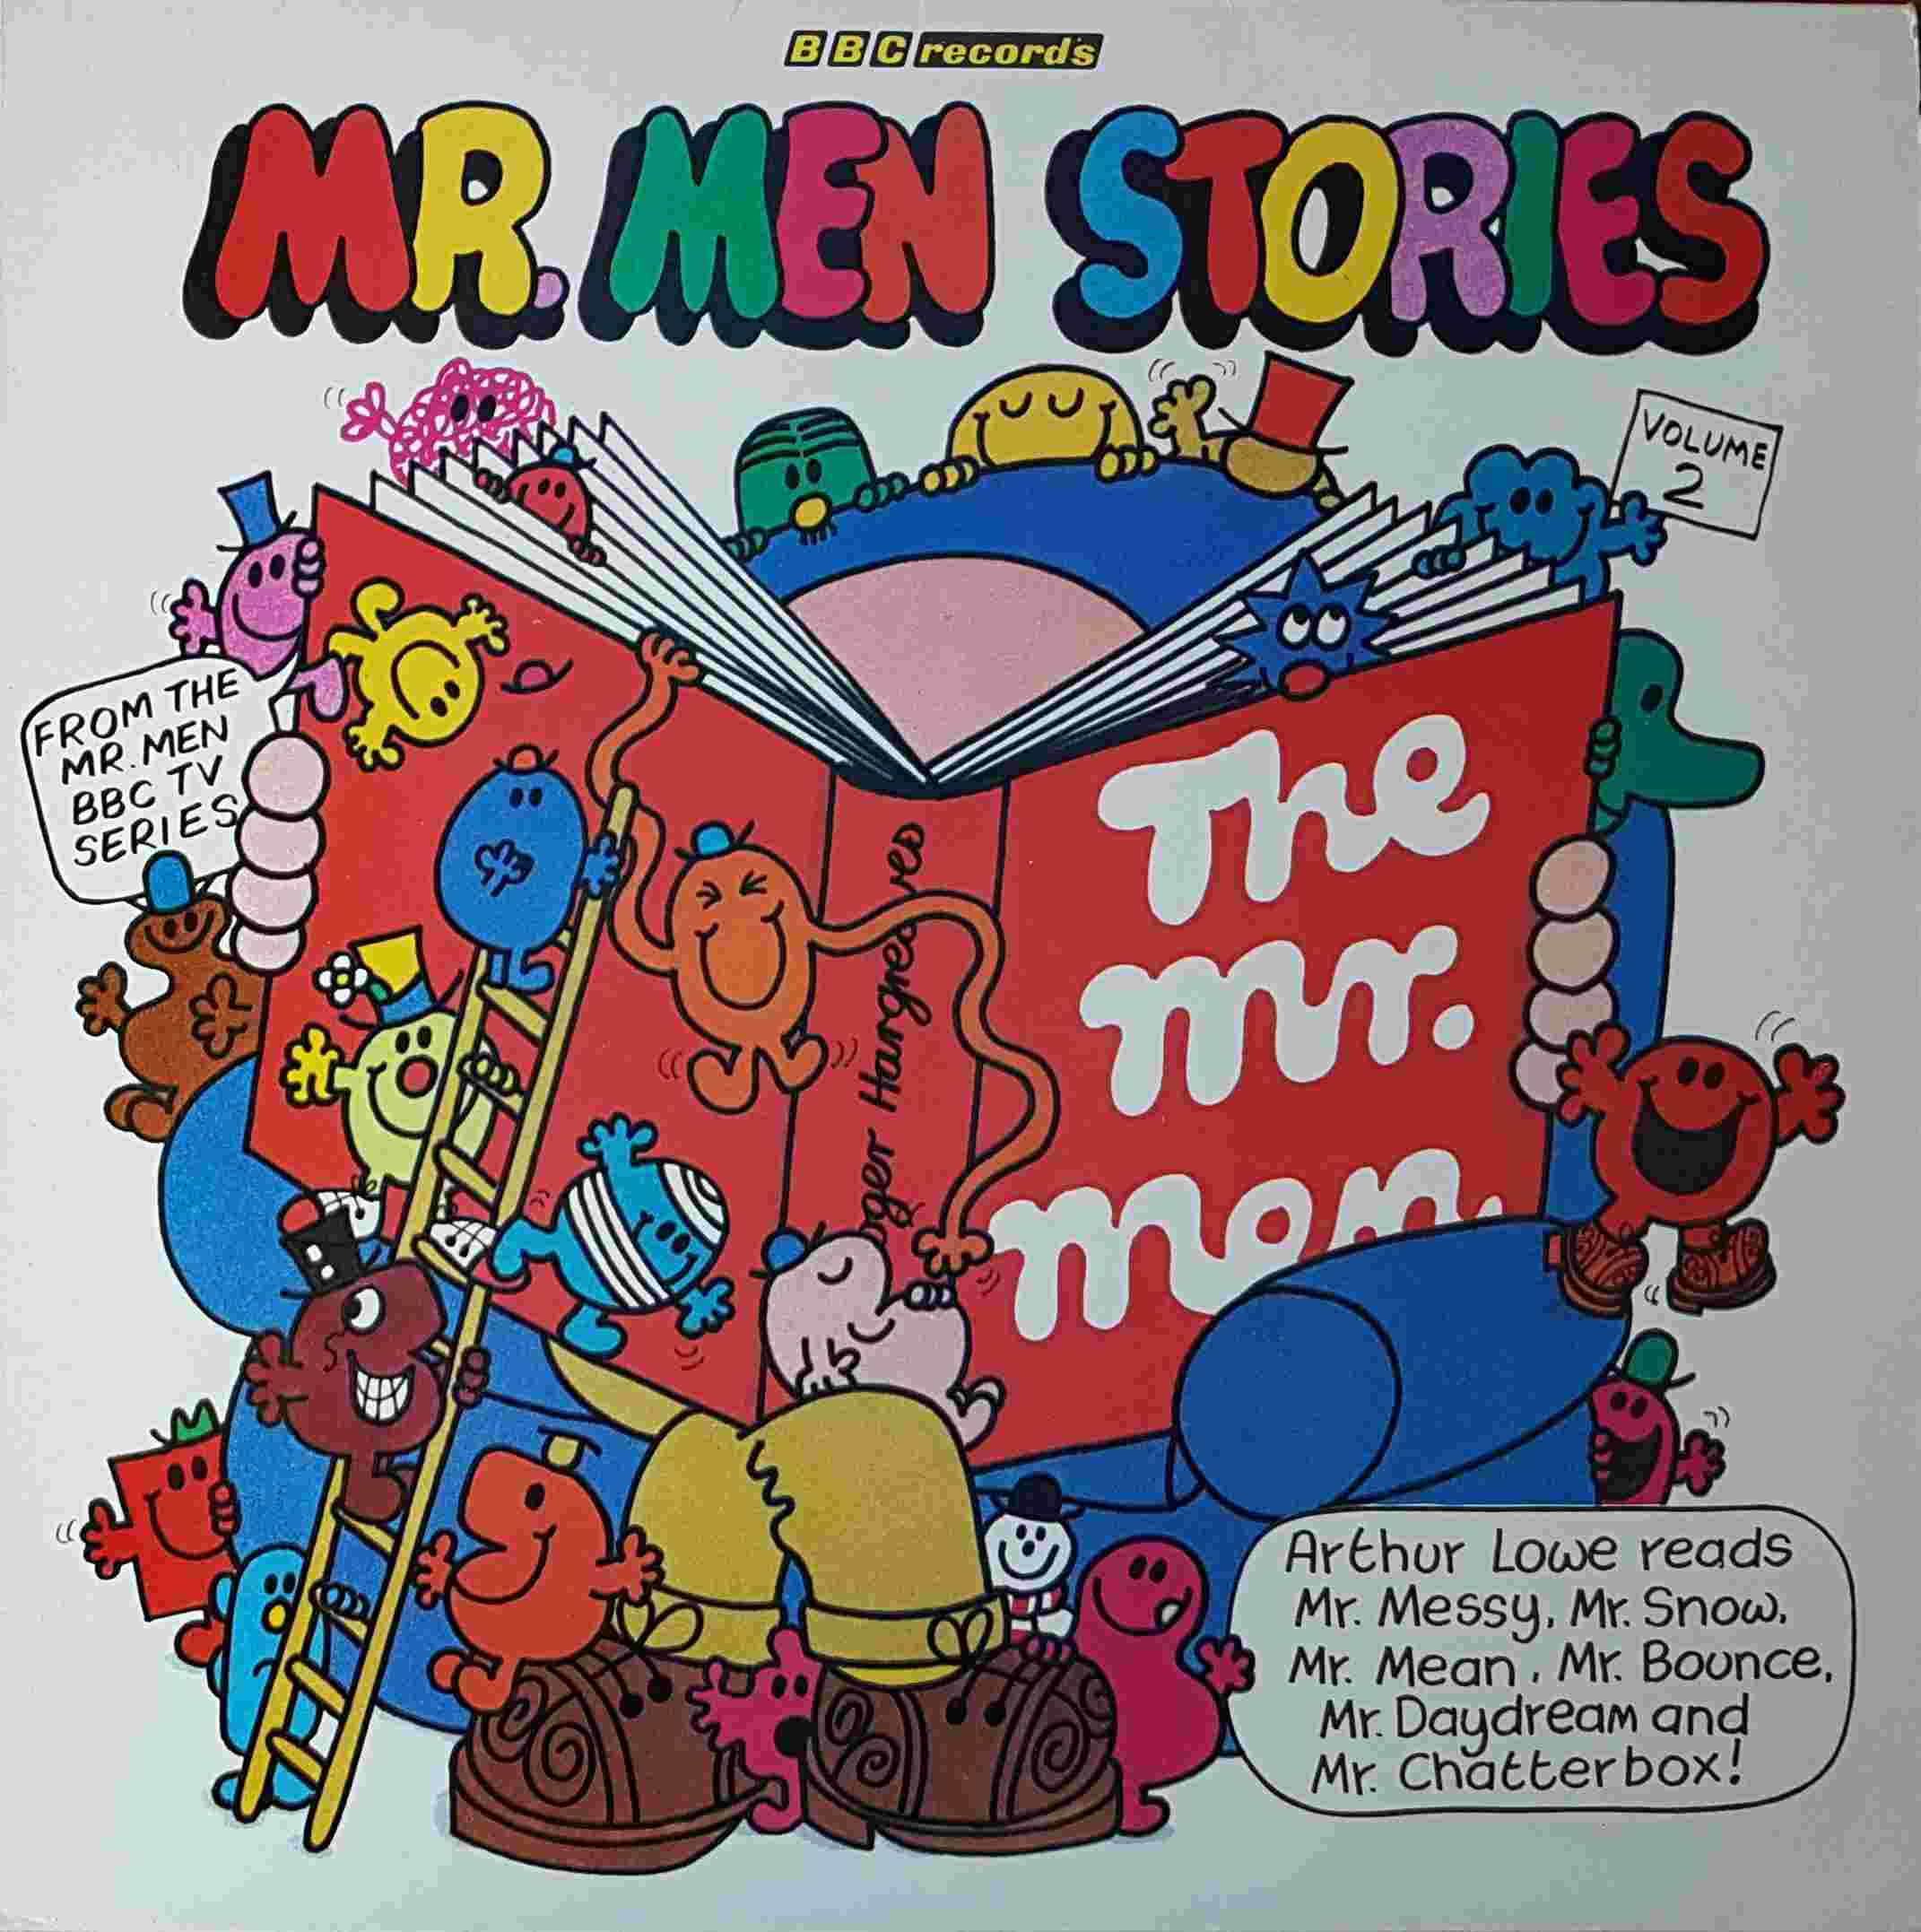 Picture of REC 386 Mr. Men stories - Volume 2 by artist Roger Hargreaves from the BBC albums - Records and Tapes library